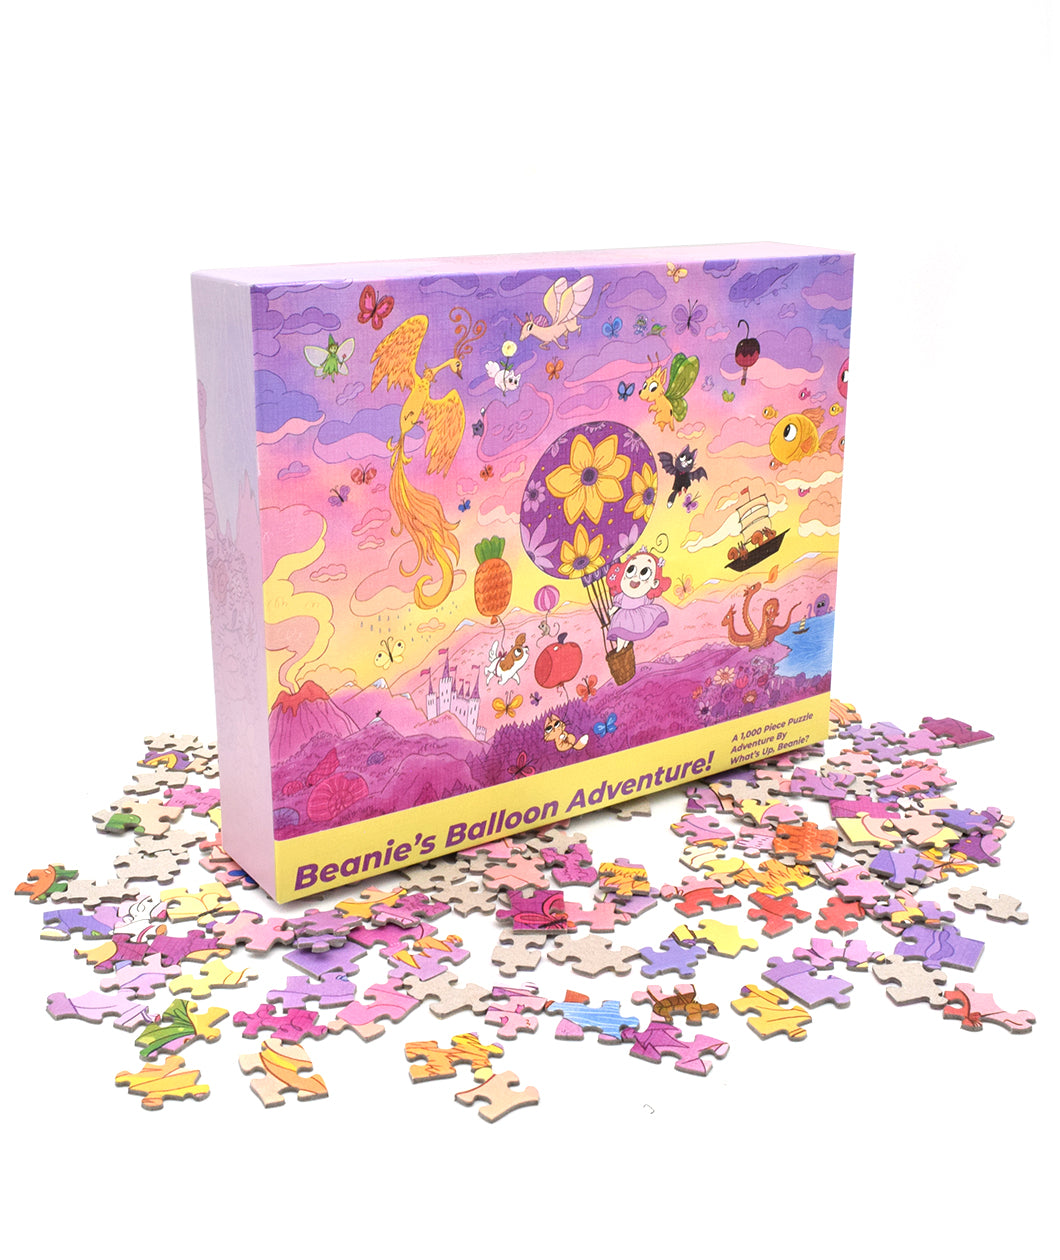 A rectangular puzzle box atop a pile of colorful puzzle pieces. The puzzle box has a pink and yellow sunset scheme and features a girl with pink hair in the basket of a purple hot air balloon decorated with flowers. The balloon floats amid a menagerie of whimsical objects in a sunset sky. Along the bottom of the box is the text 